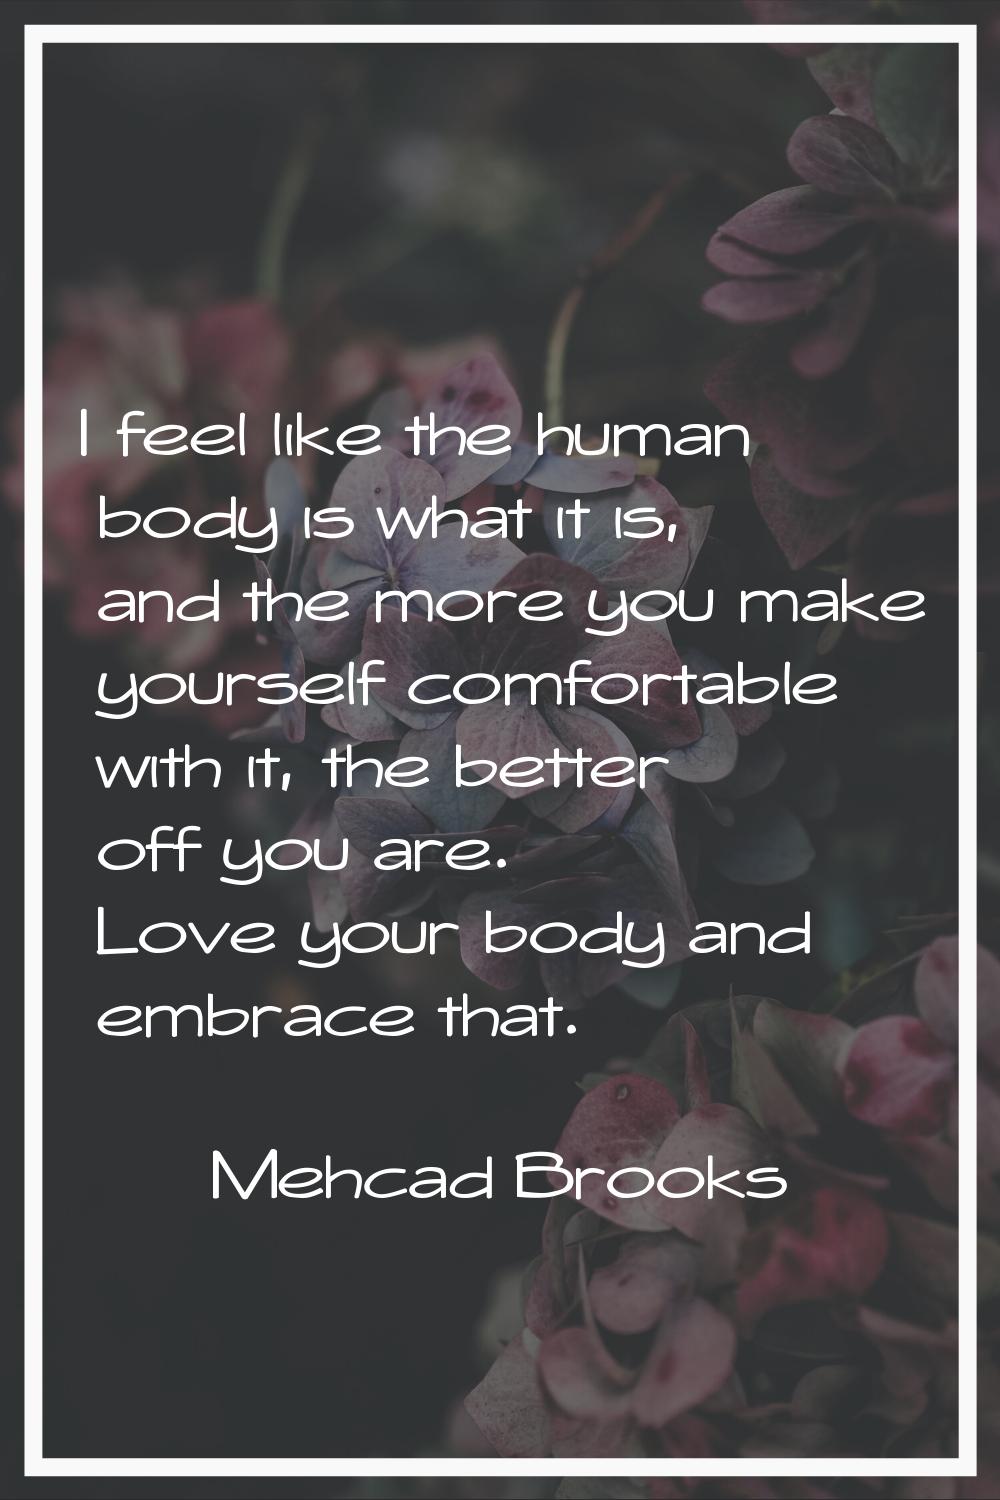 I feel like the human body is what it is, and the more you make yourself comfortable with it, the b